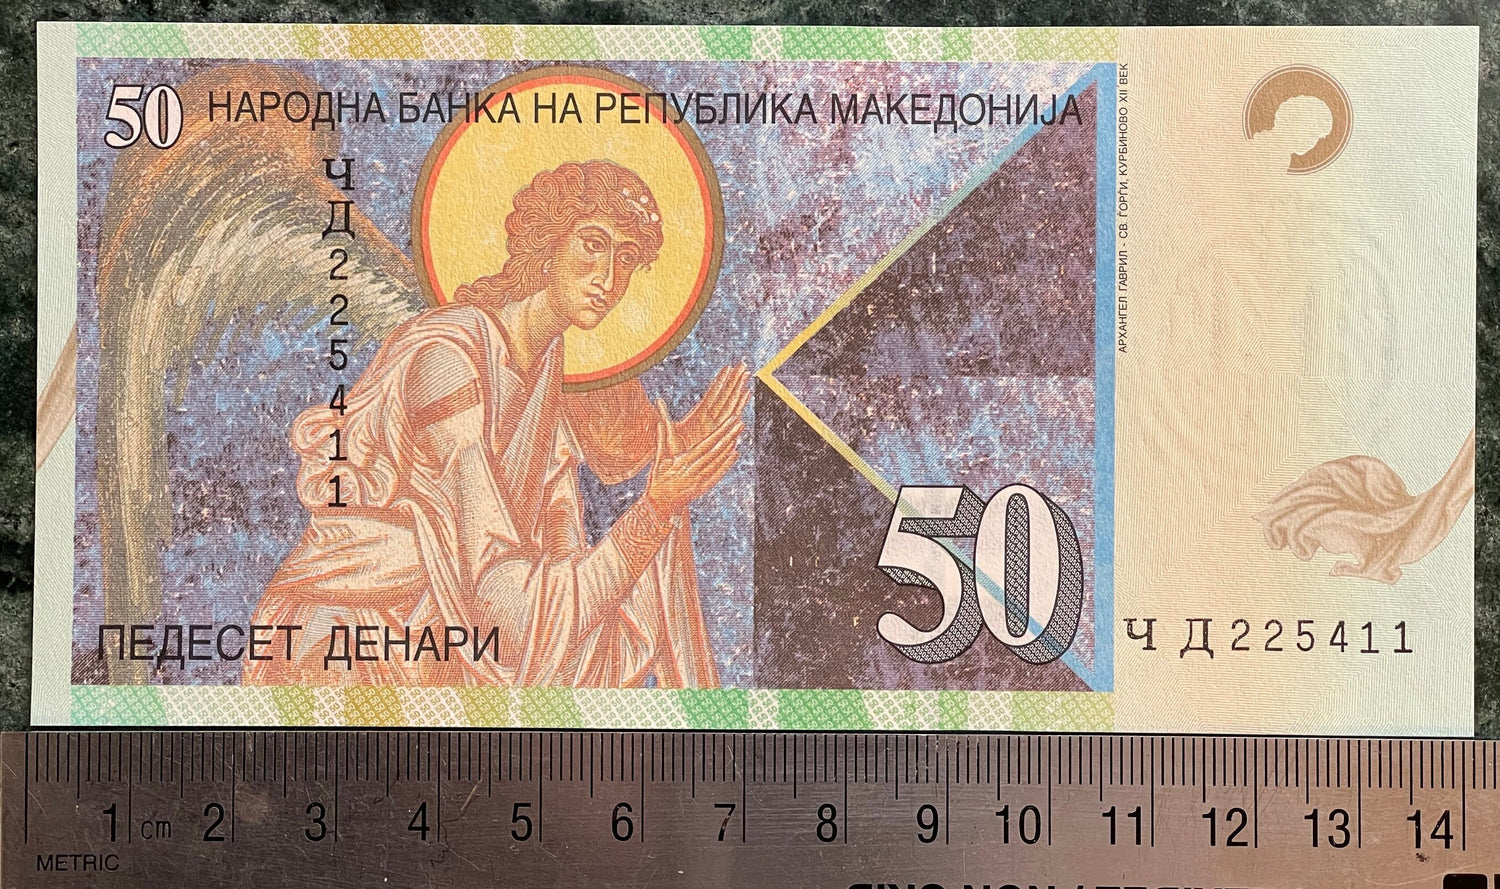 Archangel Gabriel in Annunciation at Church of St George & Byzantine Coin 50 Denari North Macedonia Authentic Banknote Money for Collage